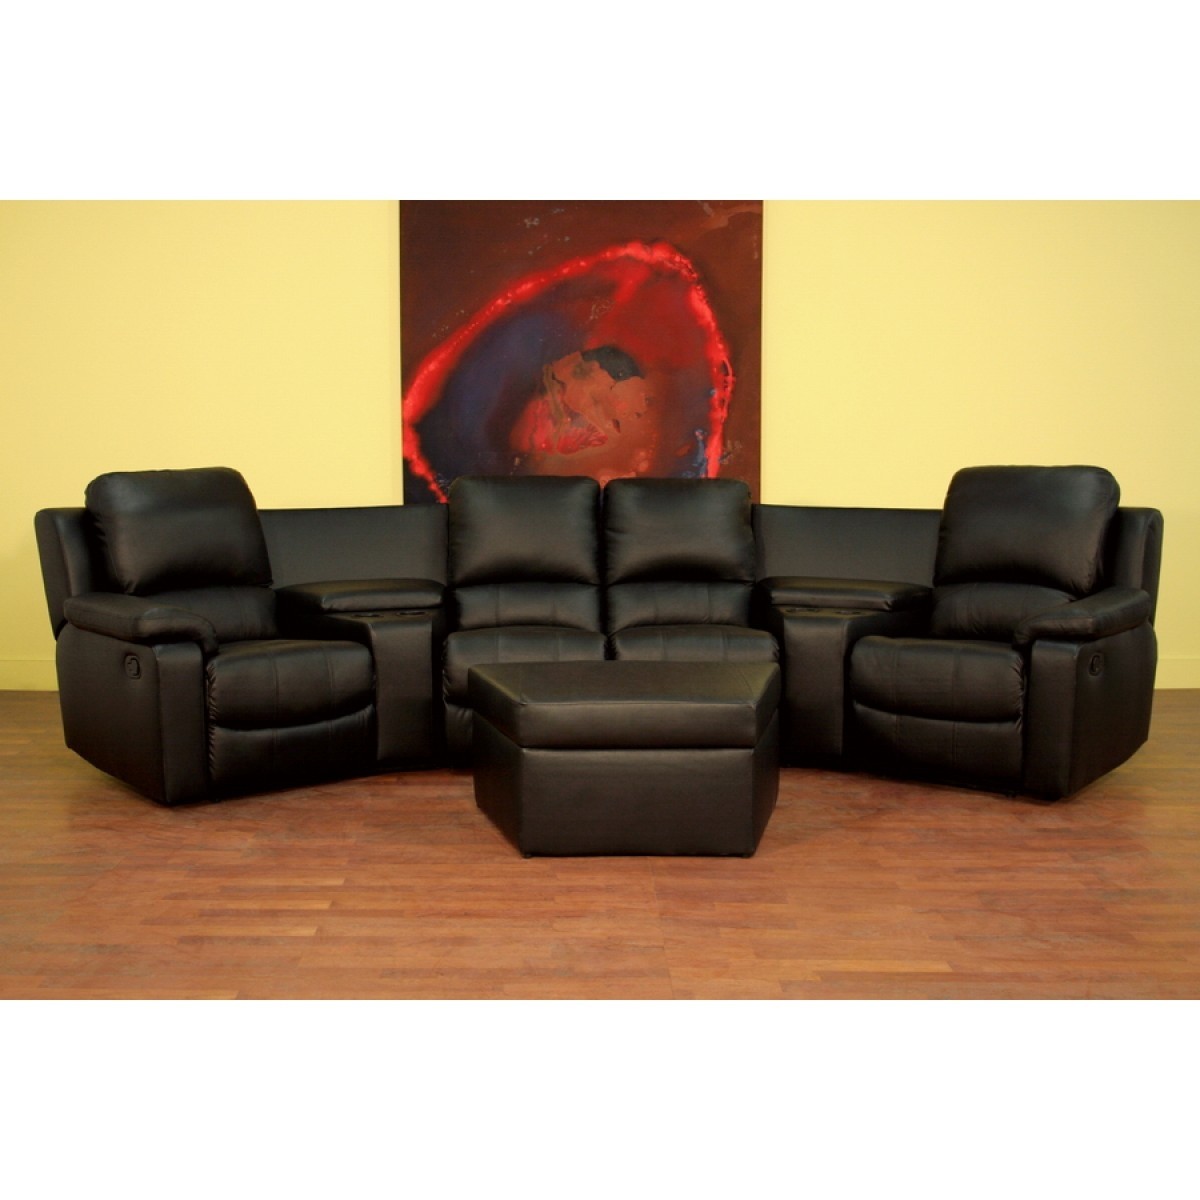 Black Leather 7 Piece Recliner Sectional Seating W Ottoman